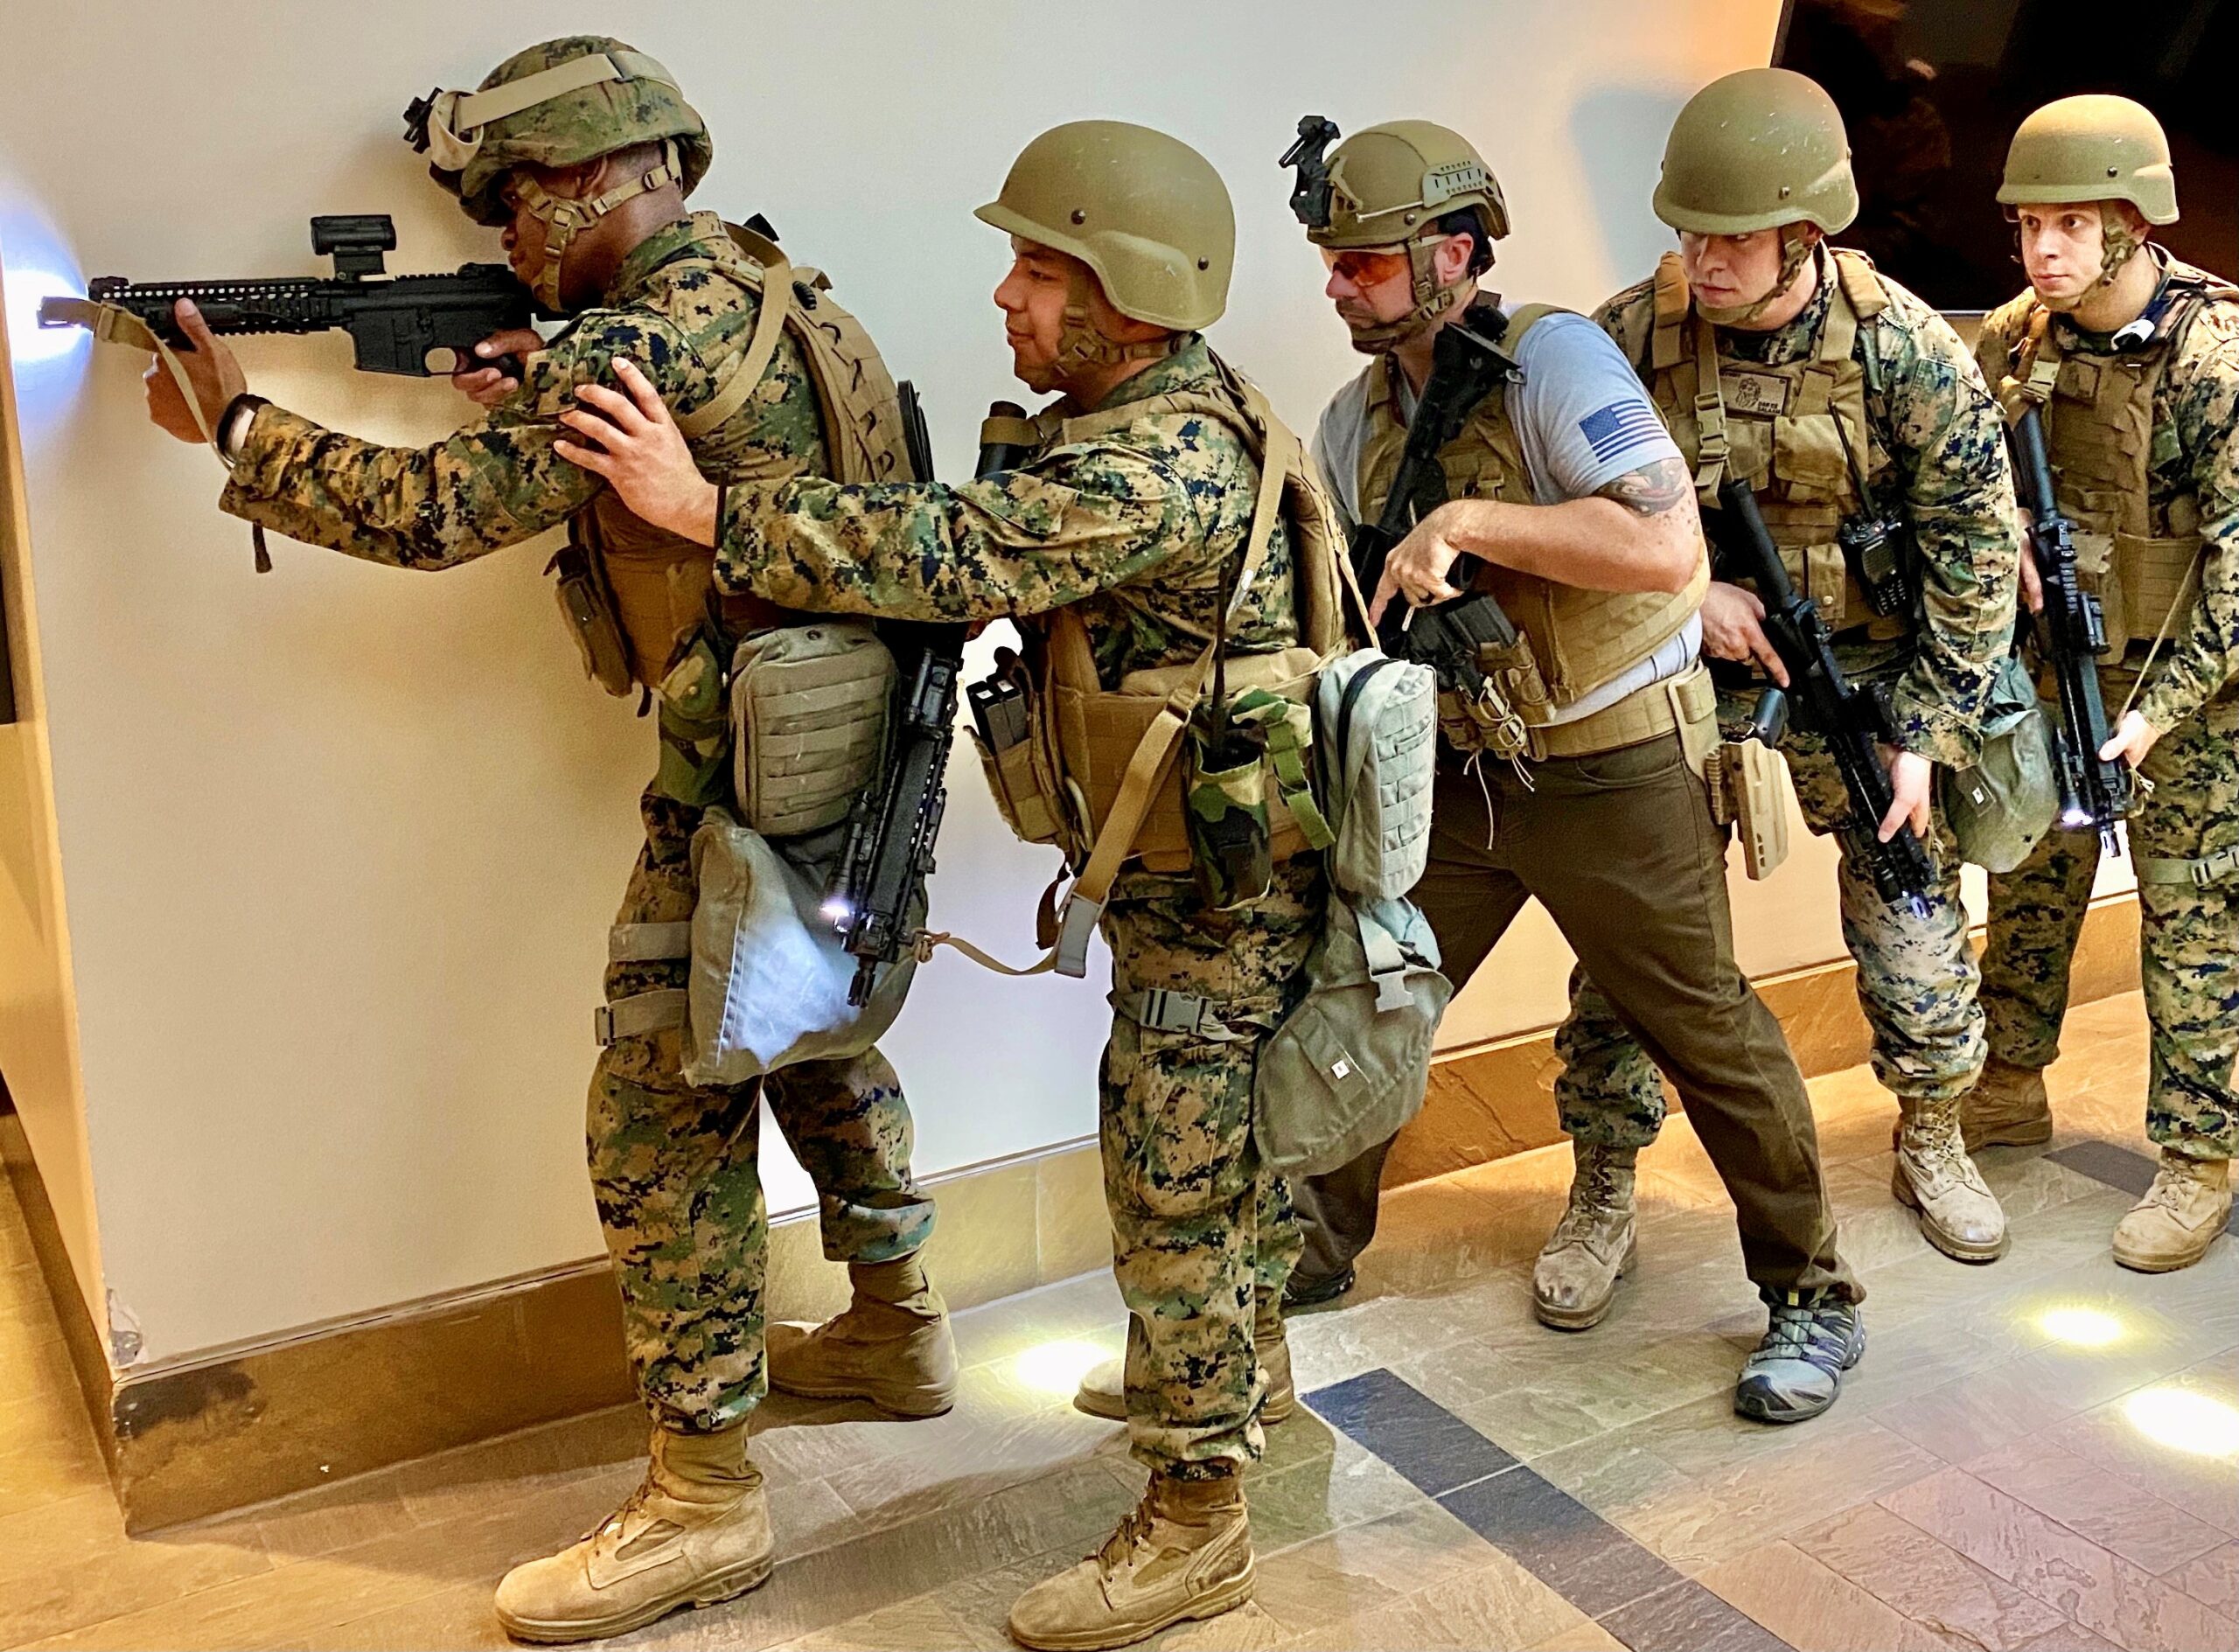 DSS special agents and Marine Security Guards stack up during an exercise at the U.S. Embassy in Dar es Salaam, Tanzania on July 6, 2021. (U.S. Department of State photo).